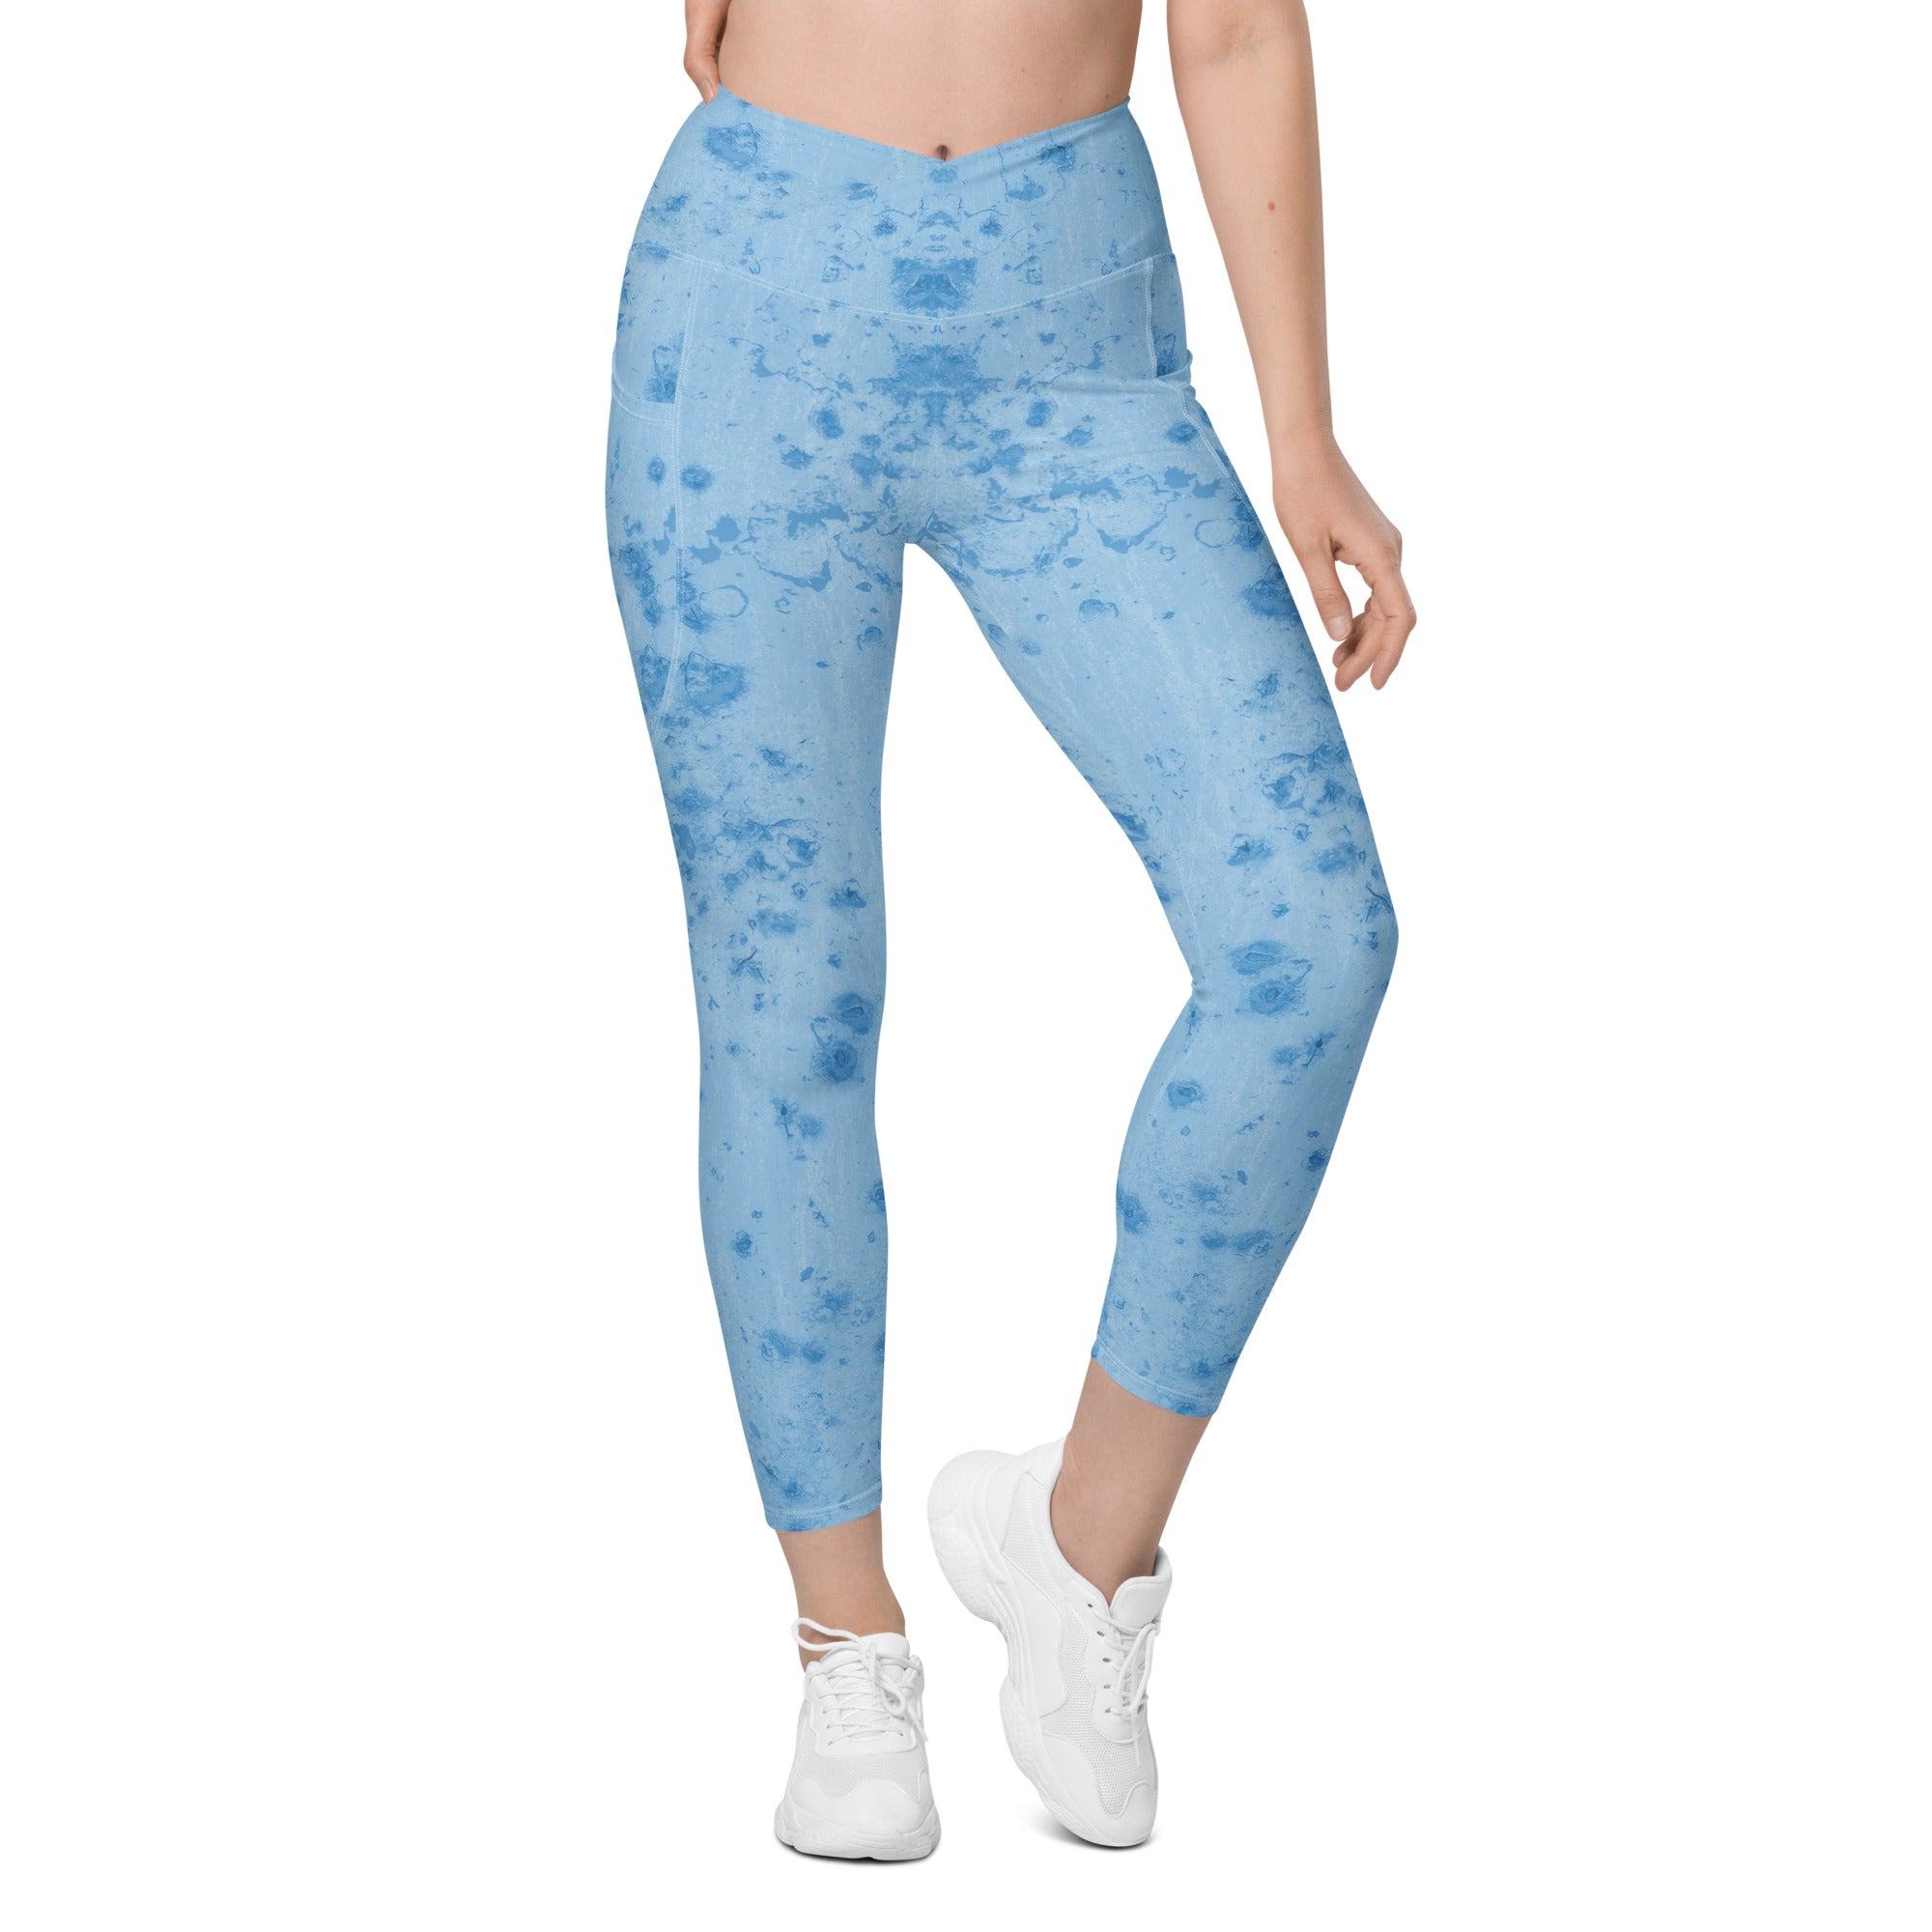 Stylish crossover leggings in granite color with model posing